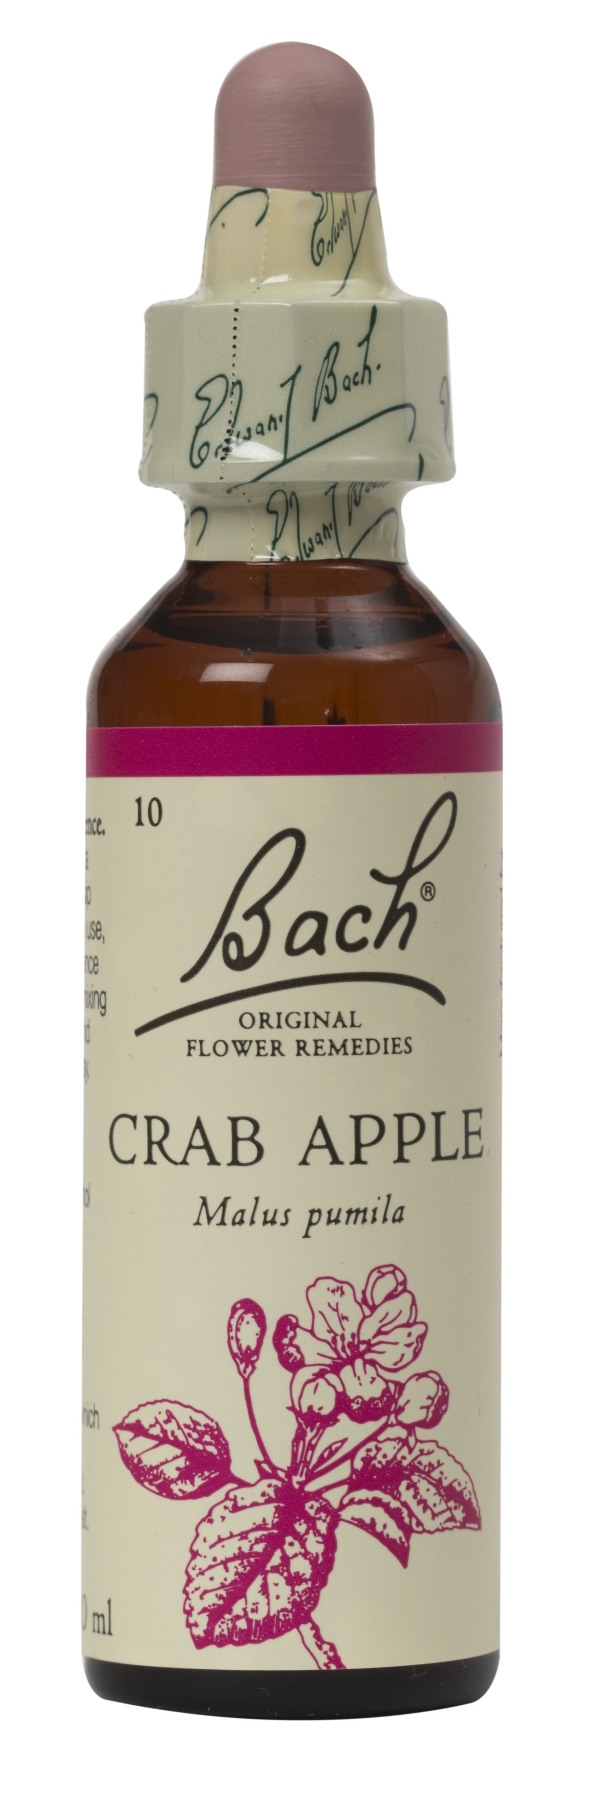 Nelson Bach Flower Remedies: Bach Crab Apple Flower Remedy (20ml) available online here